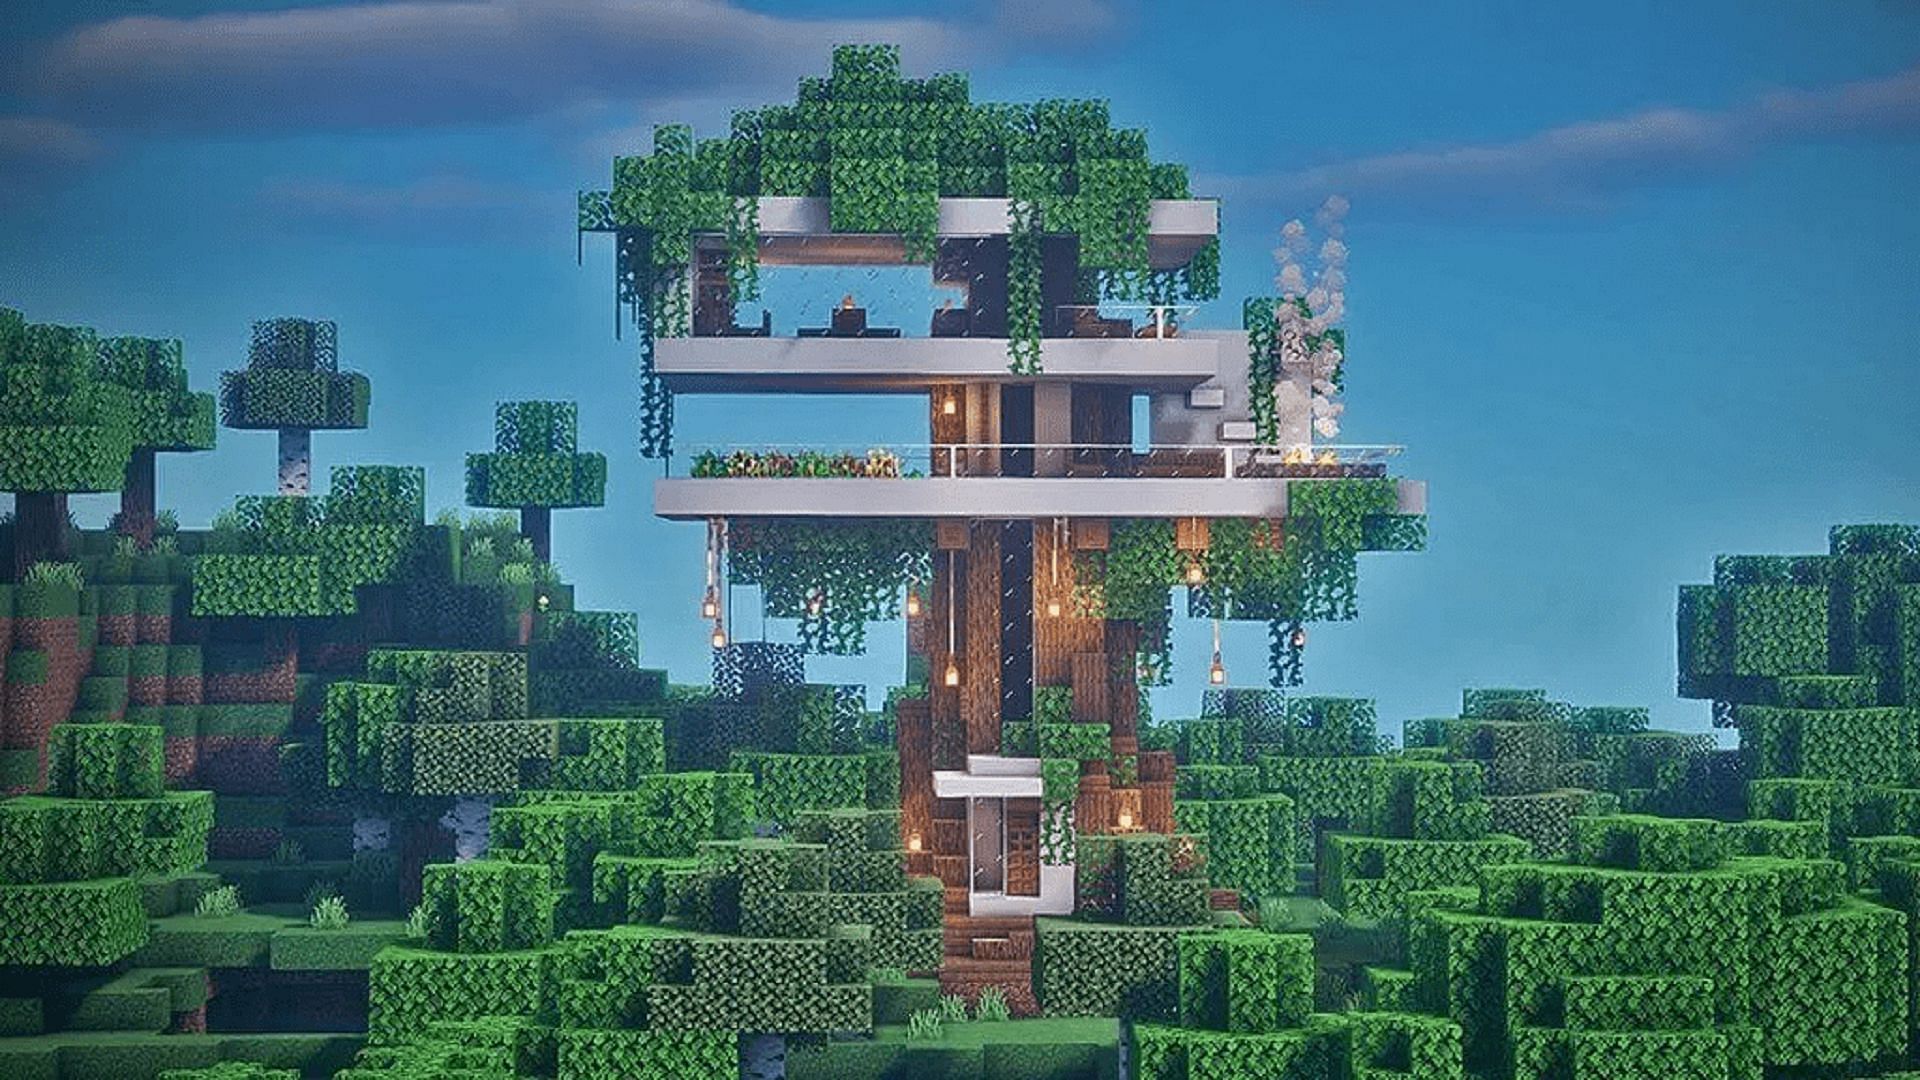 The modern architecture design works well in treehouses (Image via 6tenstudio/YouTube)